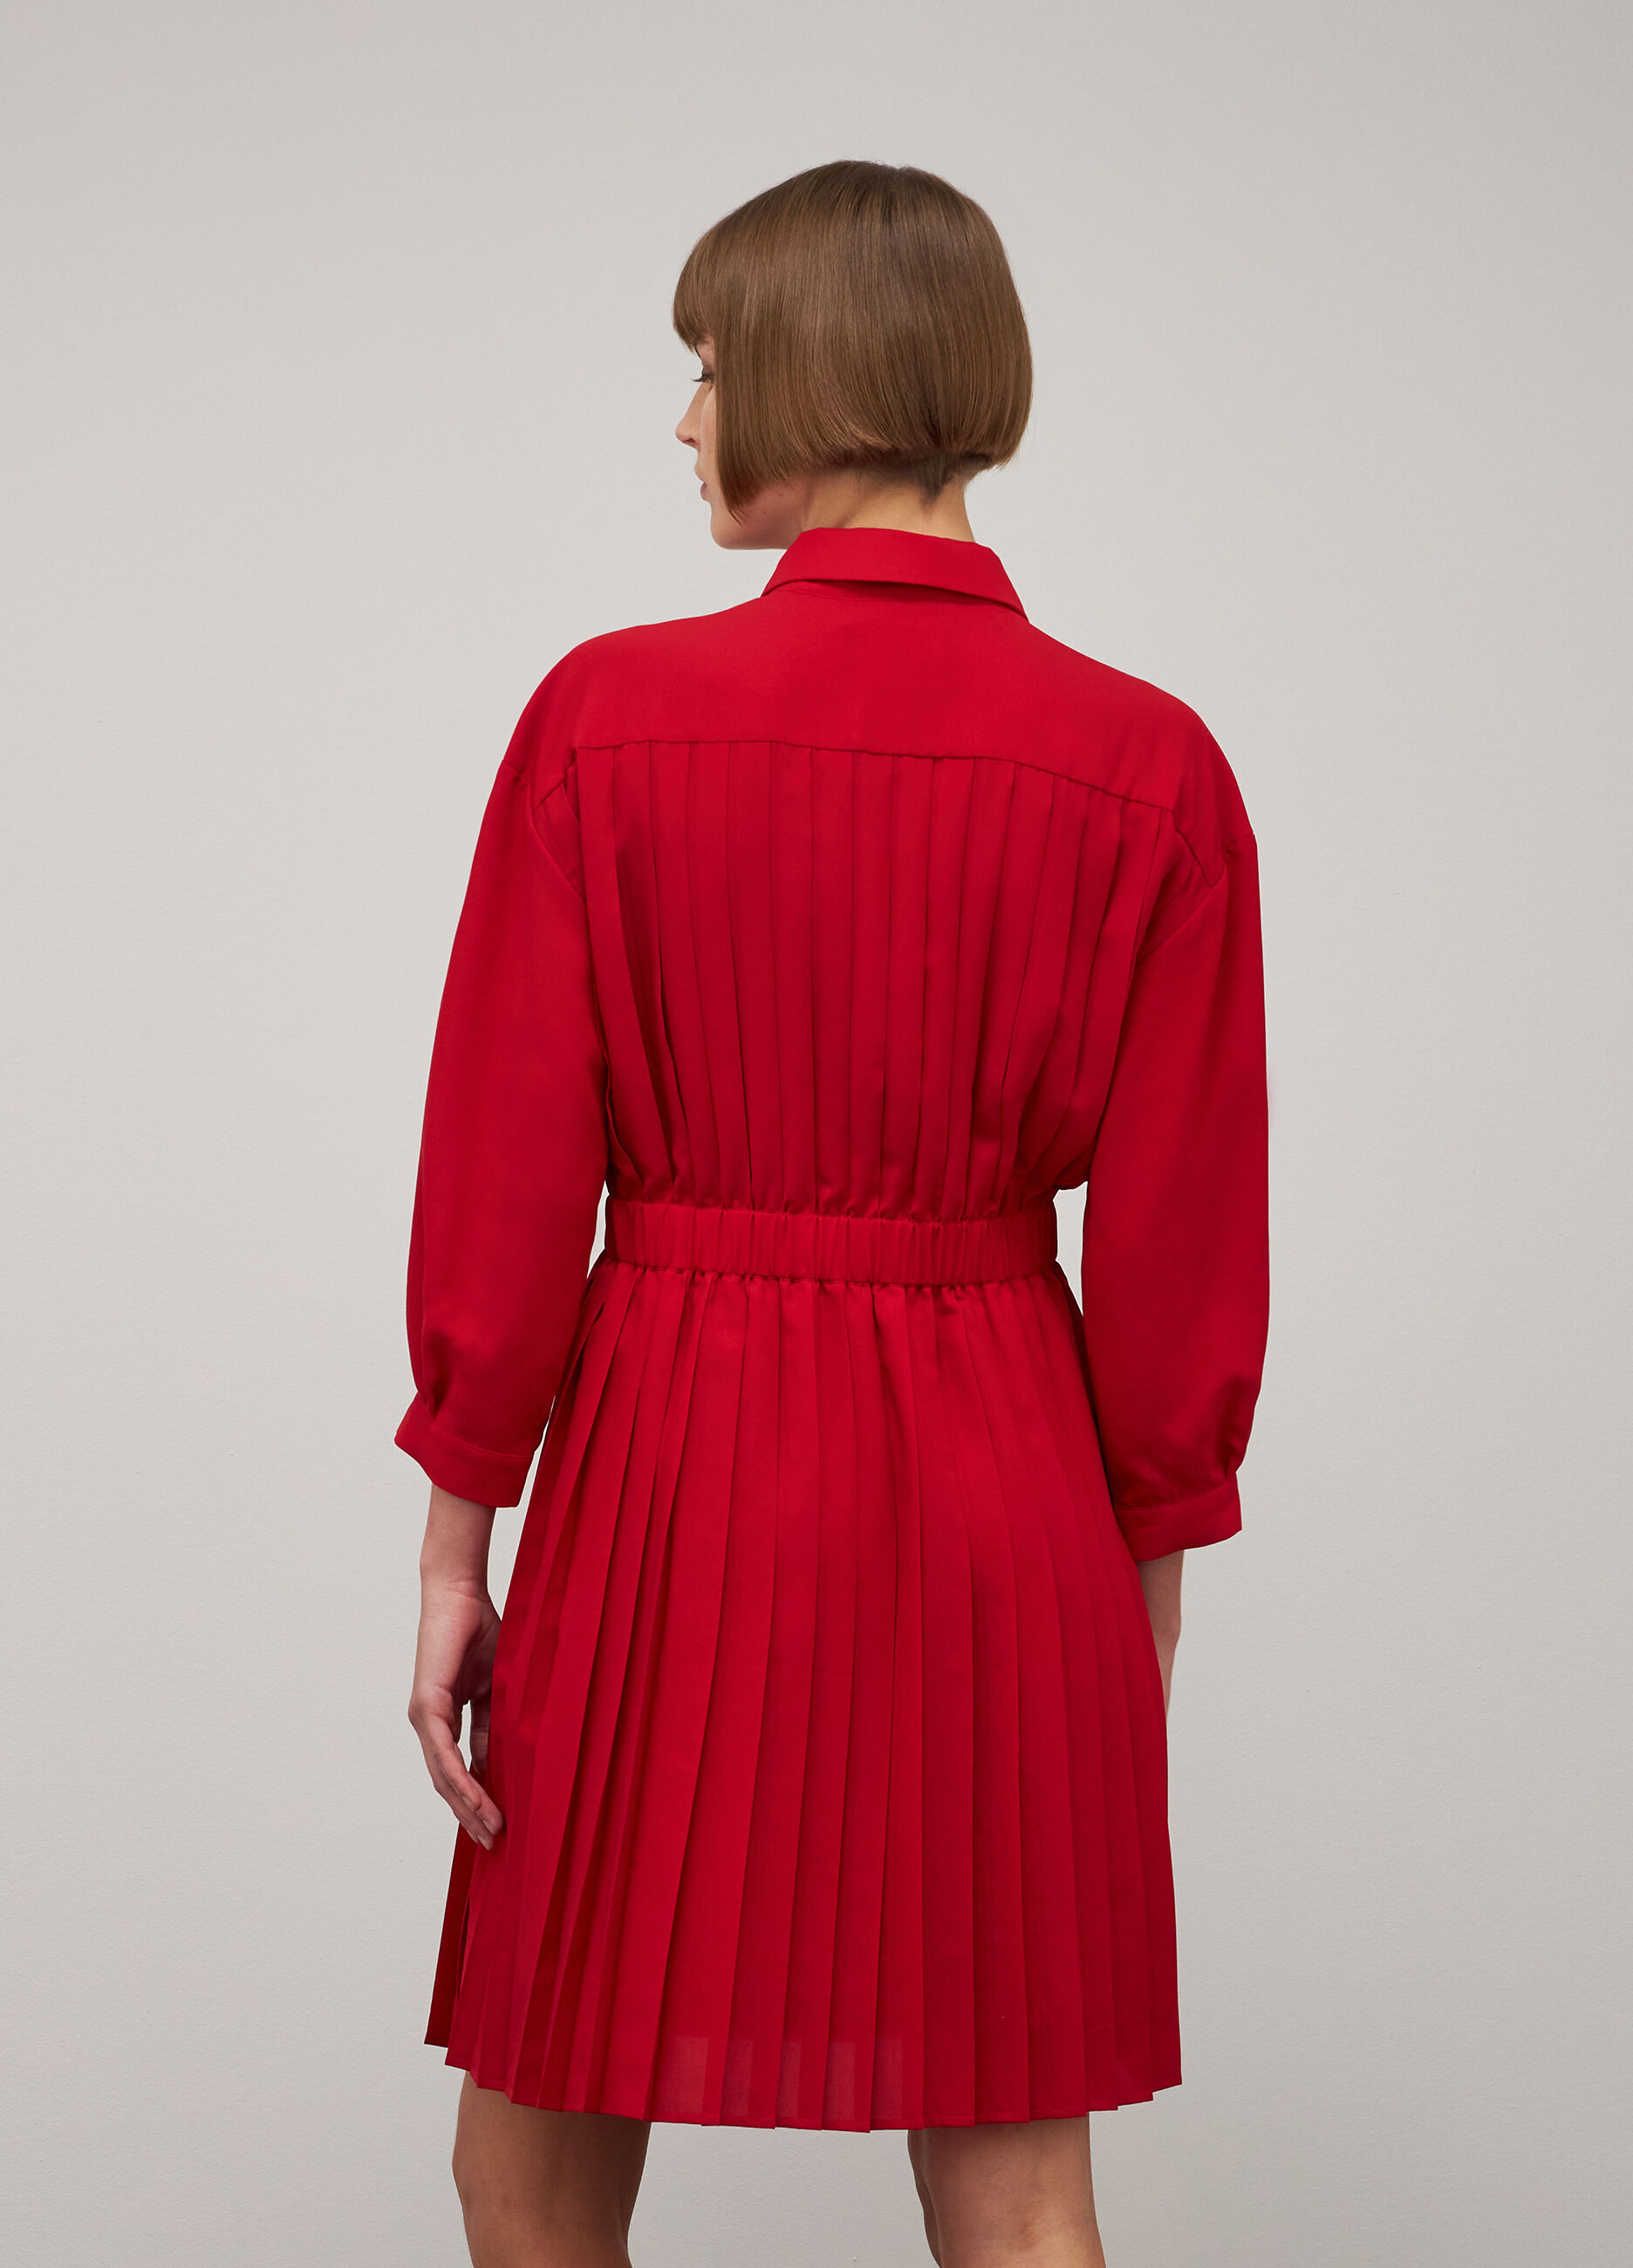 Red pleated dress_2